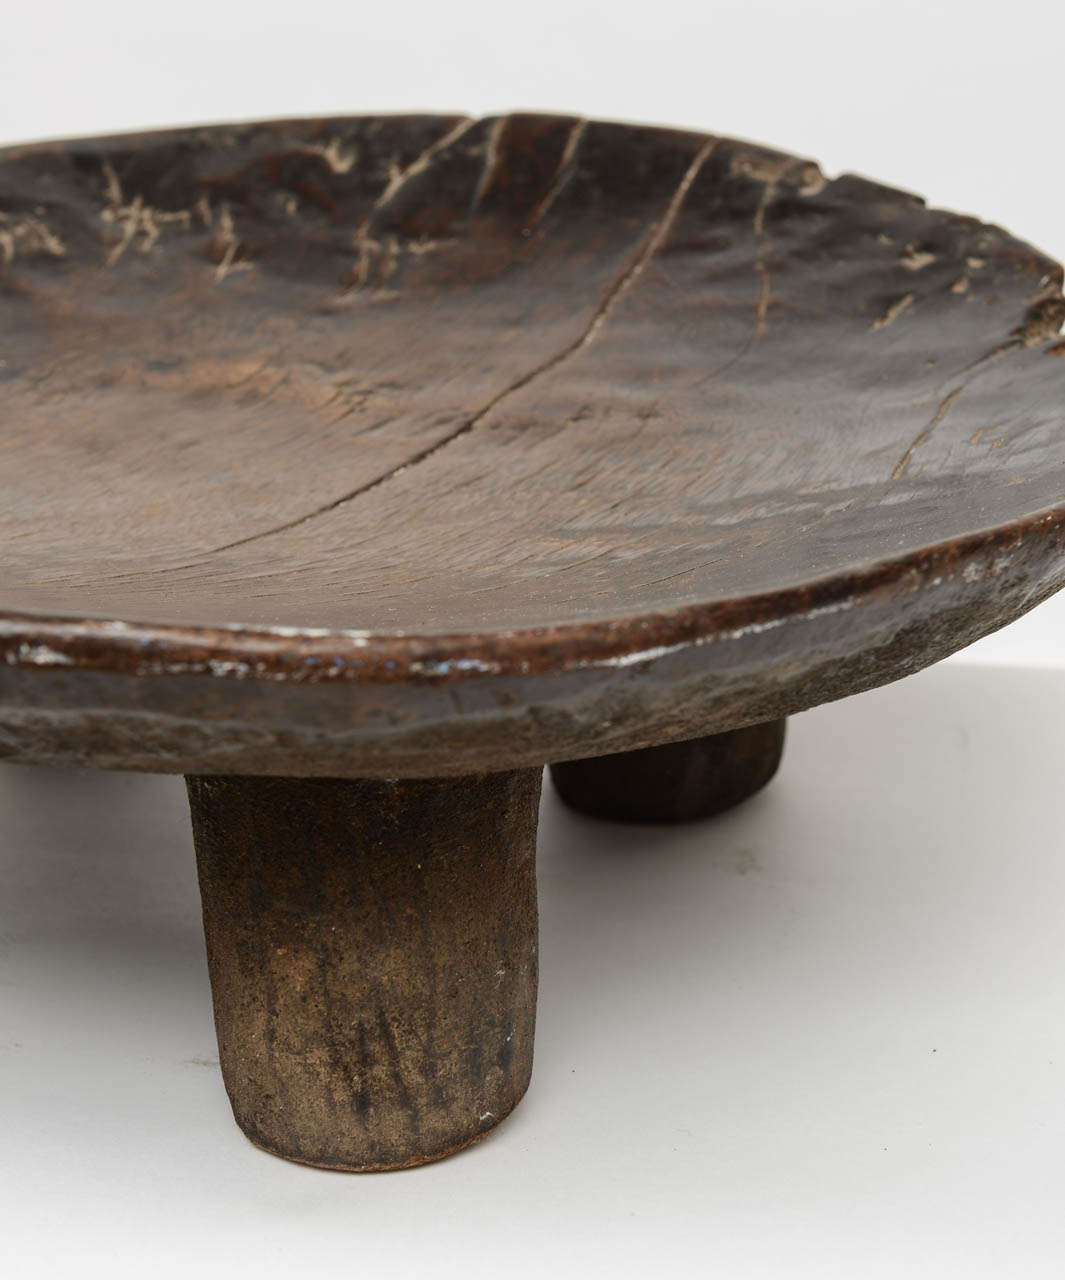 20th Century West African Hand-Carved Wood Bowl